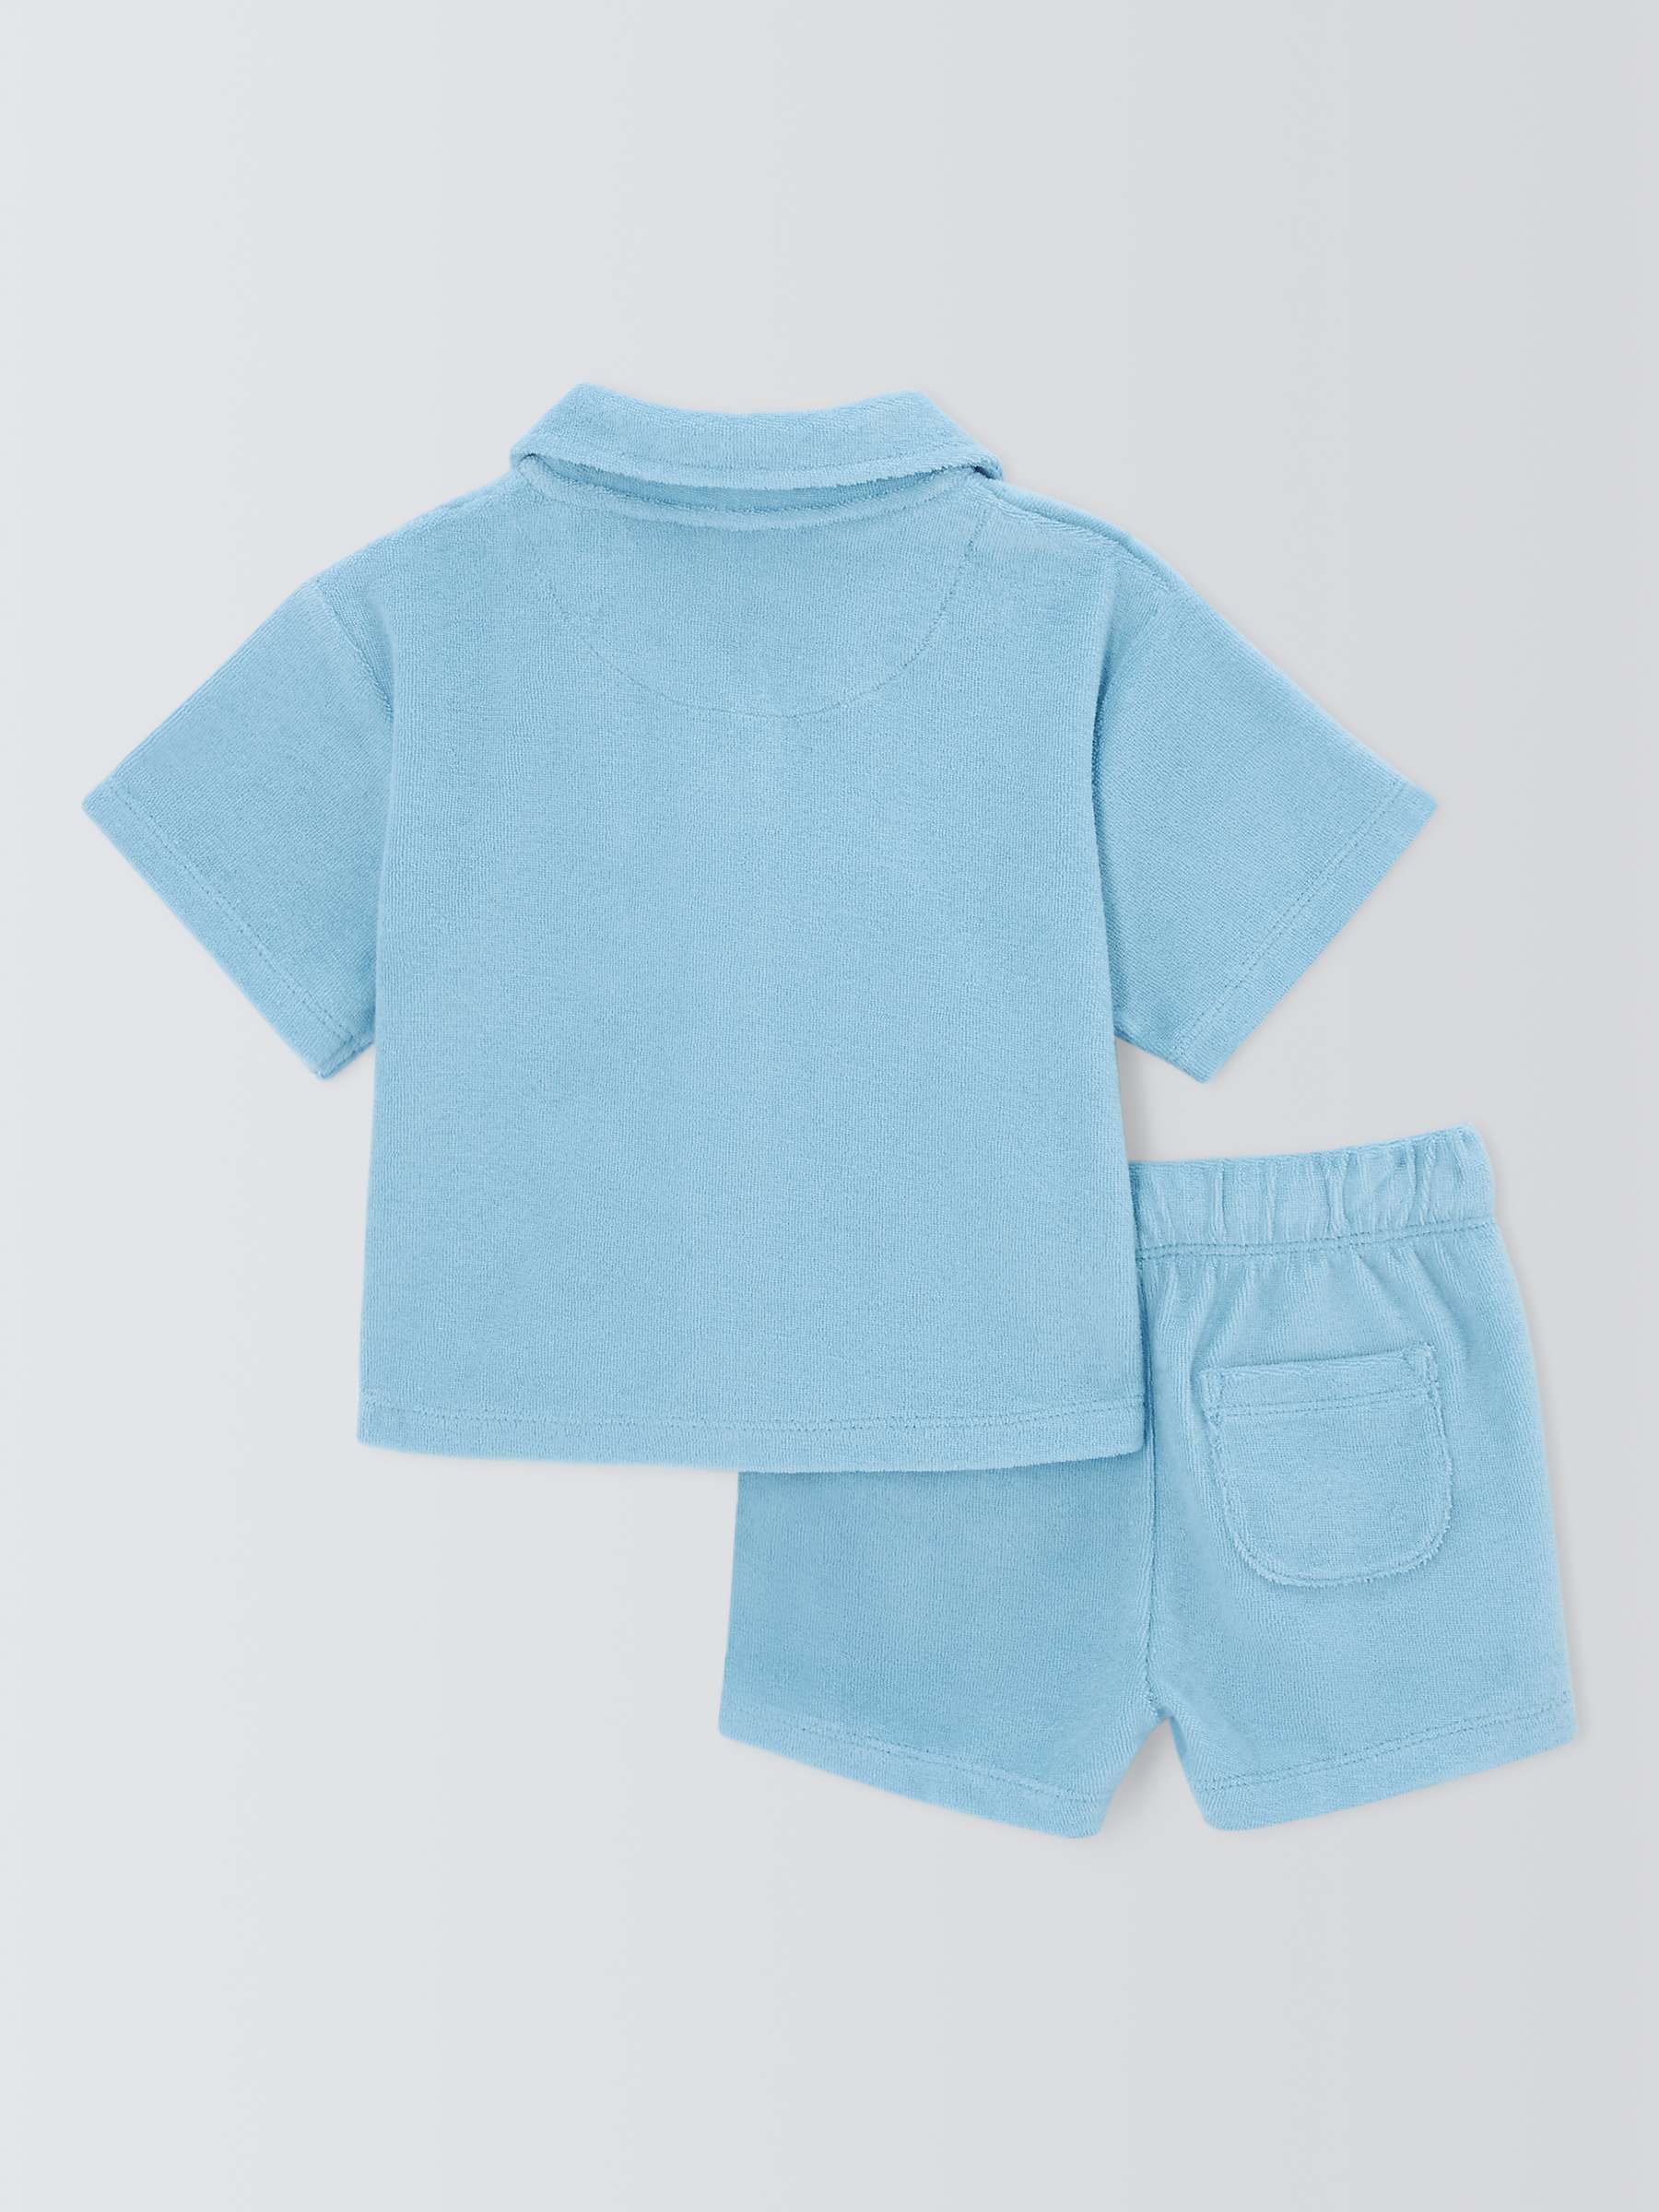 Buy John Lewis ANYDAY Baby Towelling Shirt and Shorts Set, Multi Online at johnlewis.com